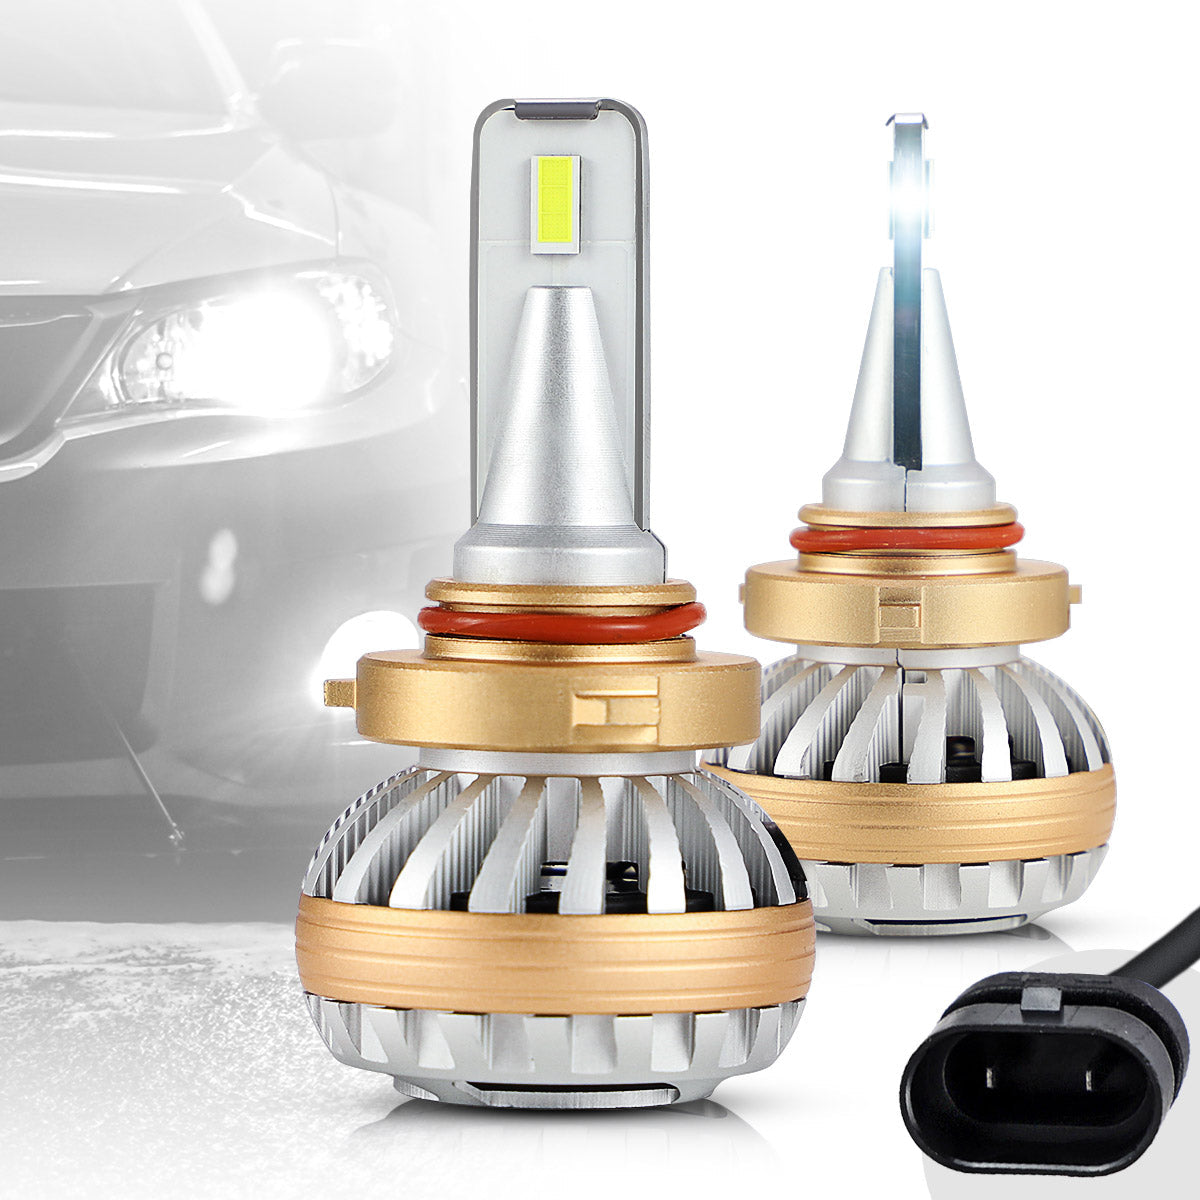 VLAND 2PCs D2S/H7/9005 LED Bulbs 6000K Fit for Headlights which don't need Ballast BULBS 